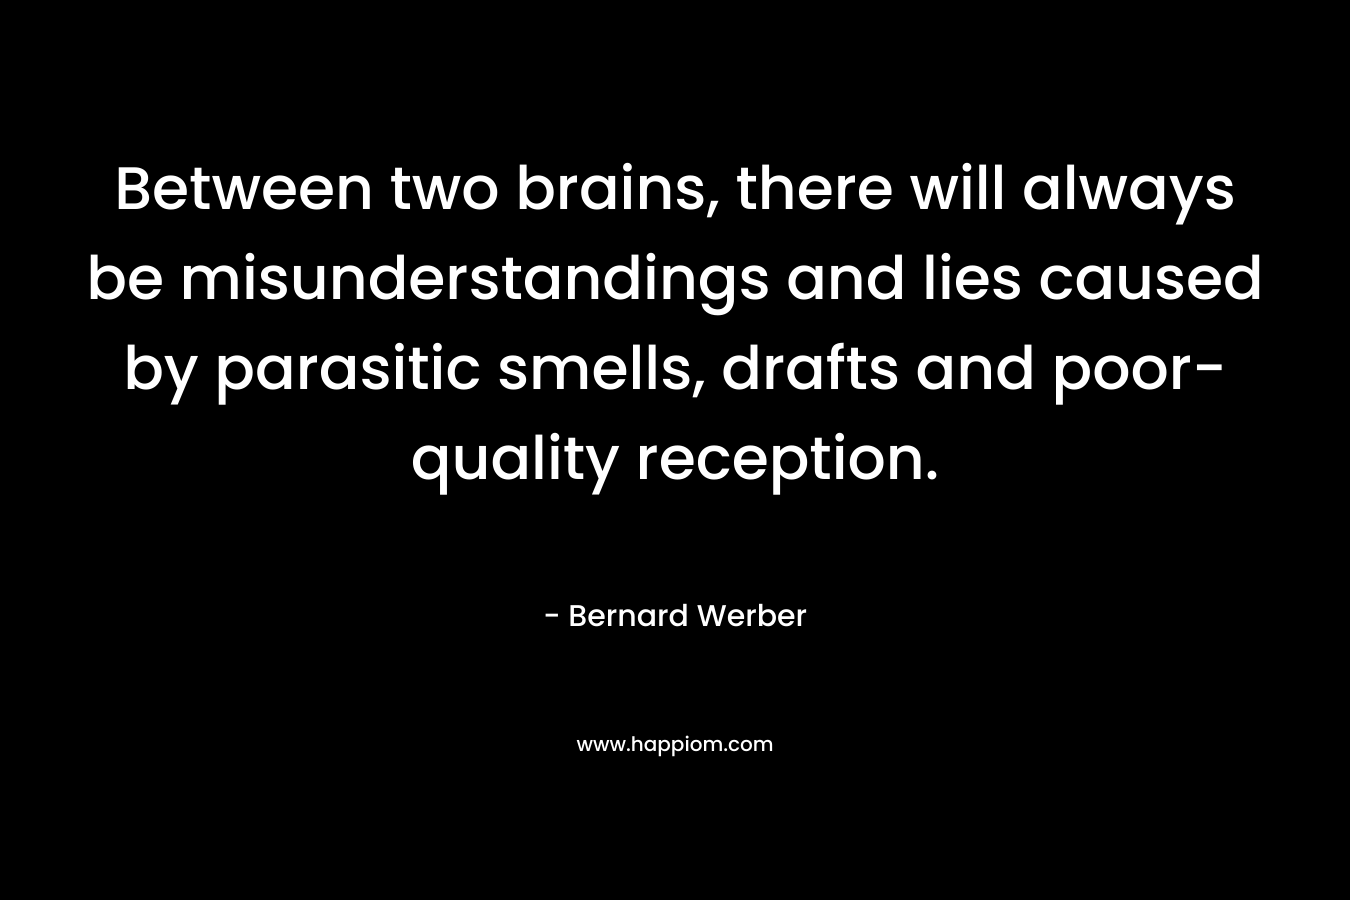 Between two brains, there will always be misunderstandings and lies caused by parasitic smells, drafts and poor-quality reception. – Bernard Werber